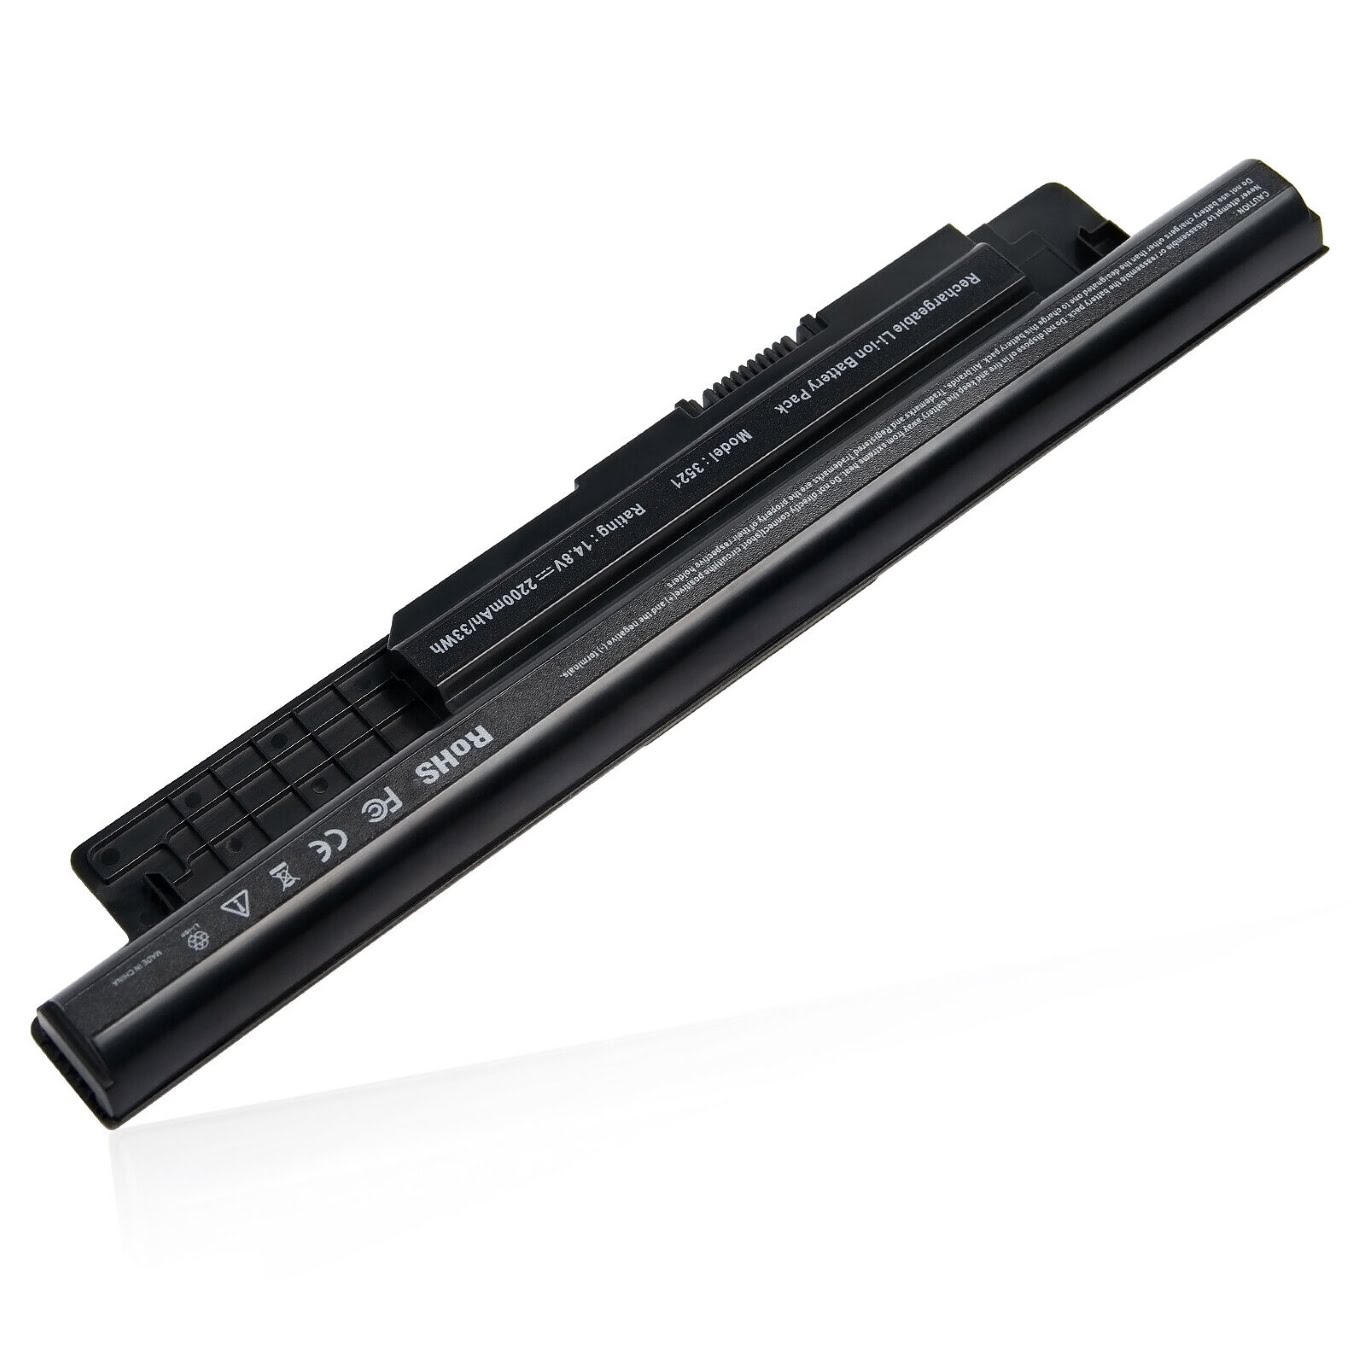 Dell 0mf69, Mr90y Laptop Batteries For Inspiron 14 3421, Inspiron 14r 5421 replacement